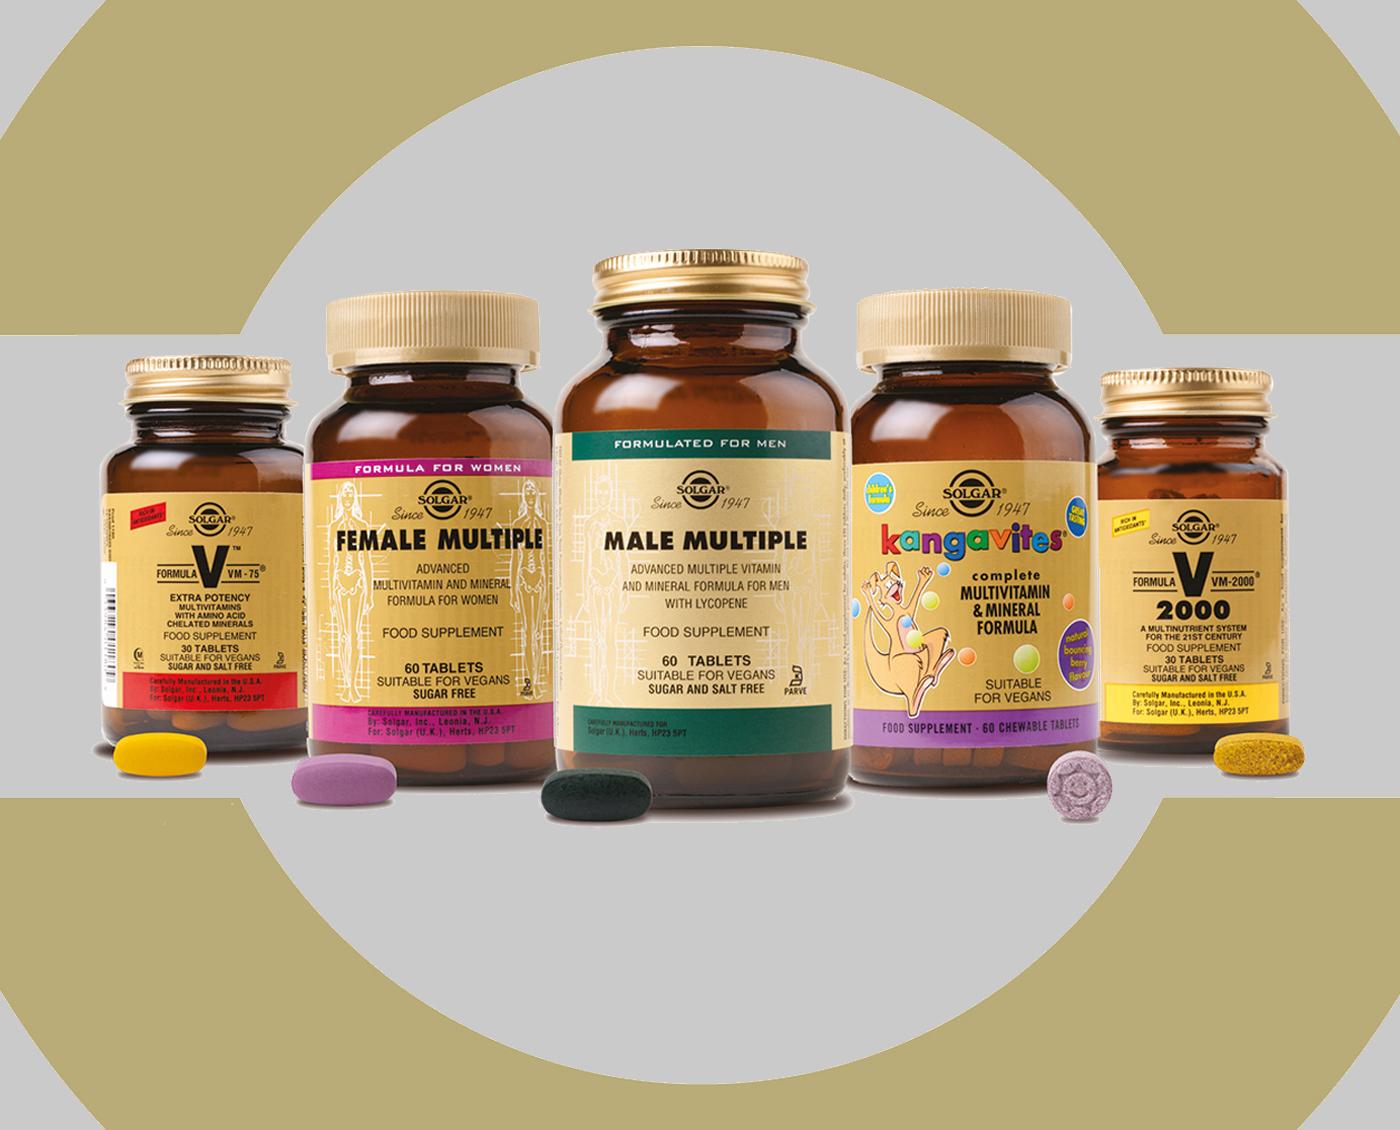 Health & Beauty|A Wide range of health products, Vitamins and Minerals, Herbal Food Supplements. Brands including HealthAid, Higher Nature, Solgar and many more|SHOP NOW